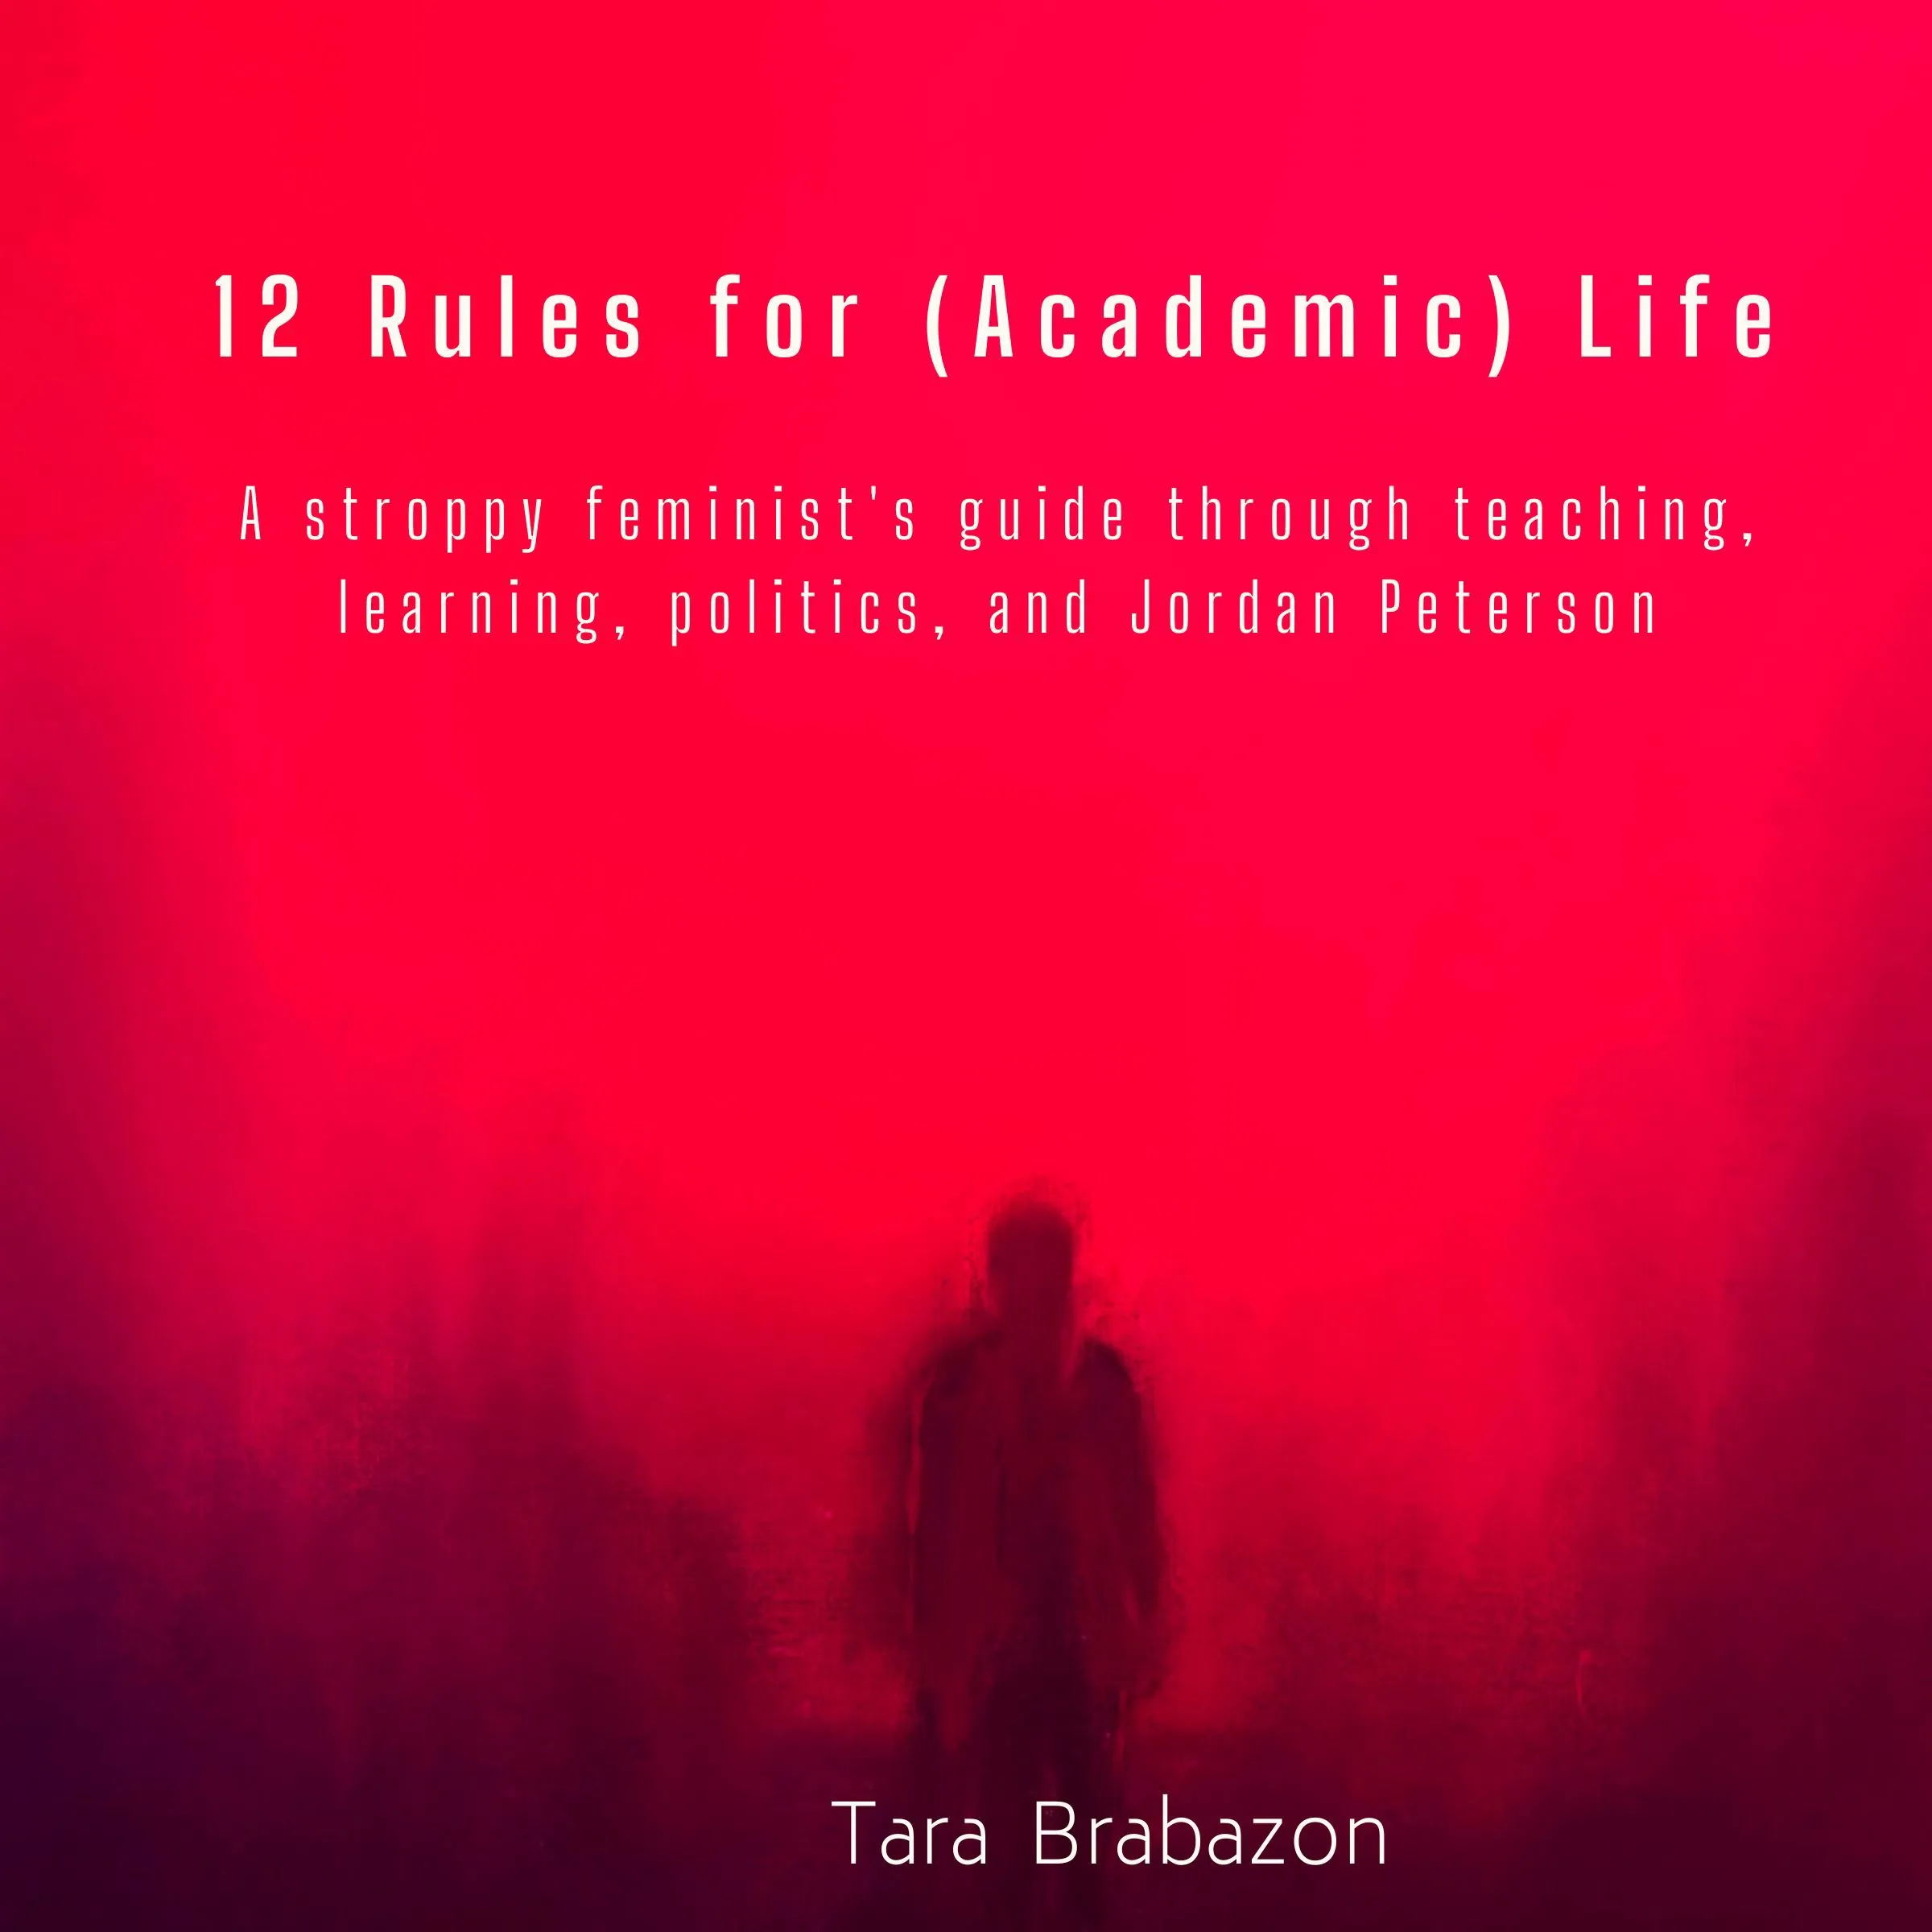 12 Rules for (Academic) Life Audiobook by Tara Brabazon